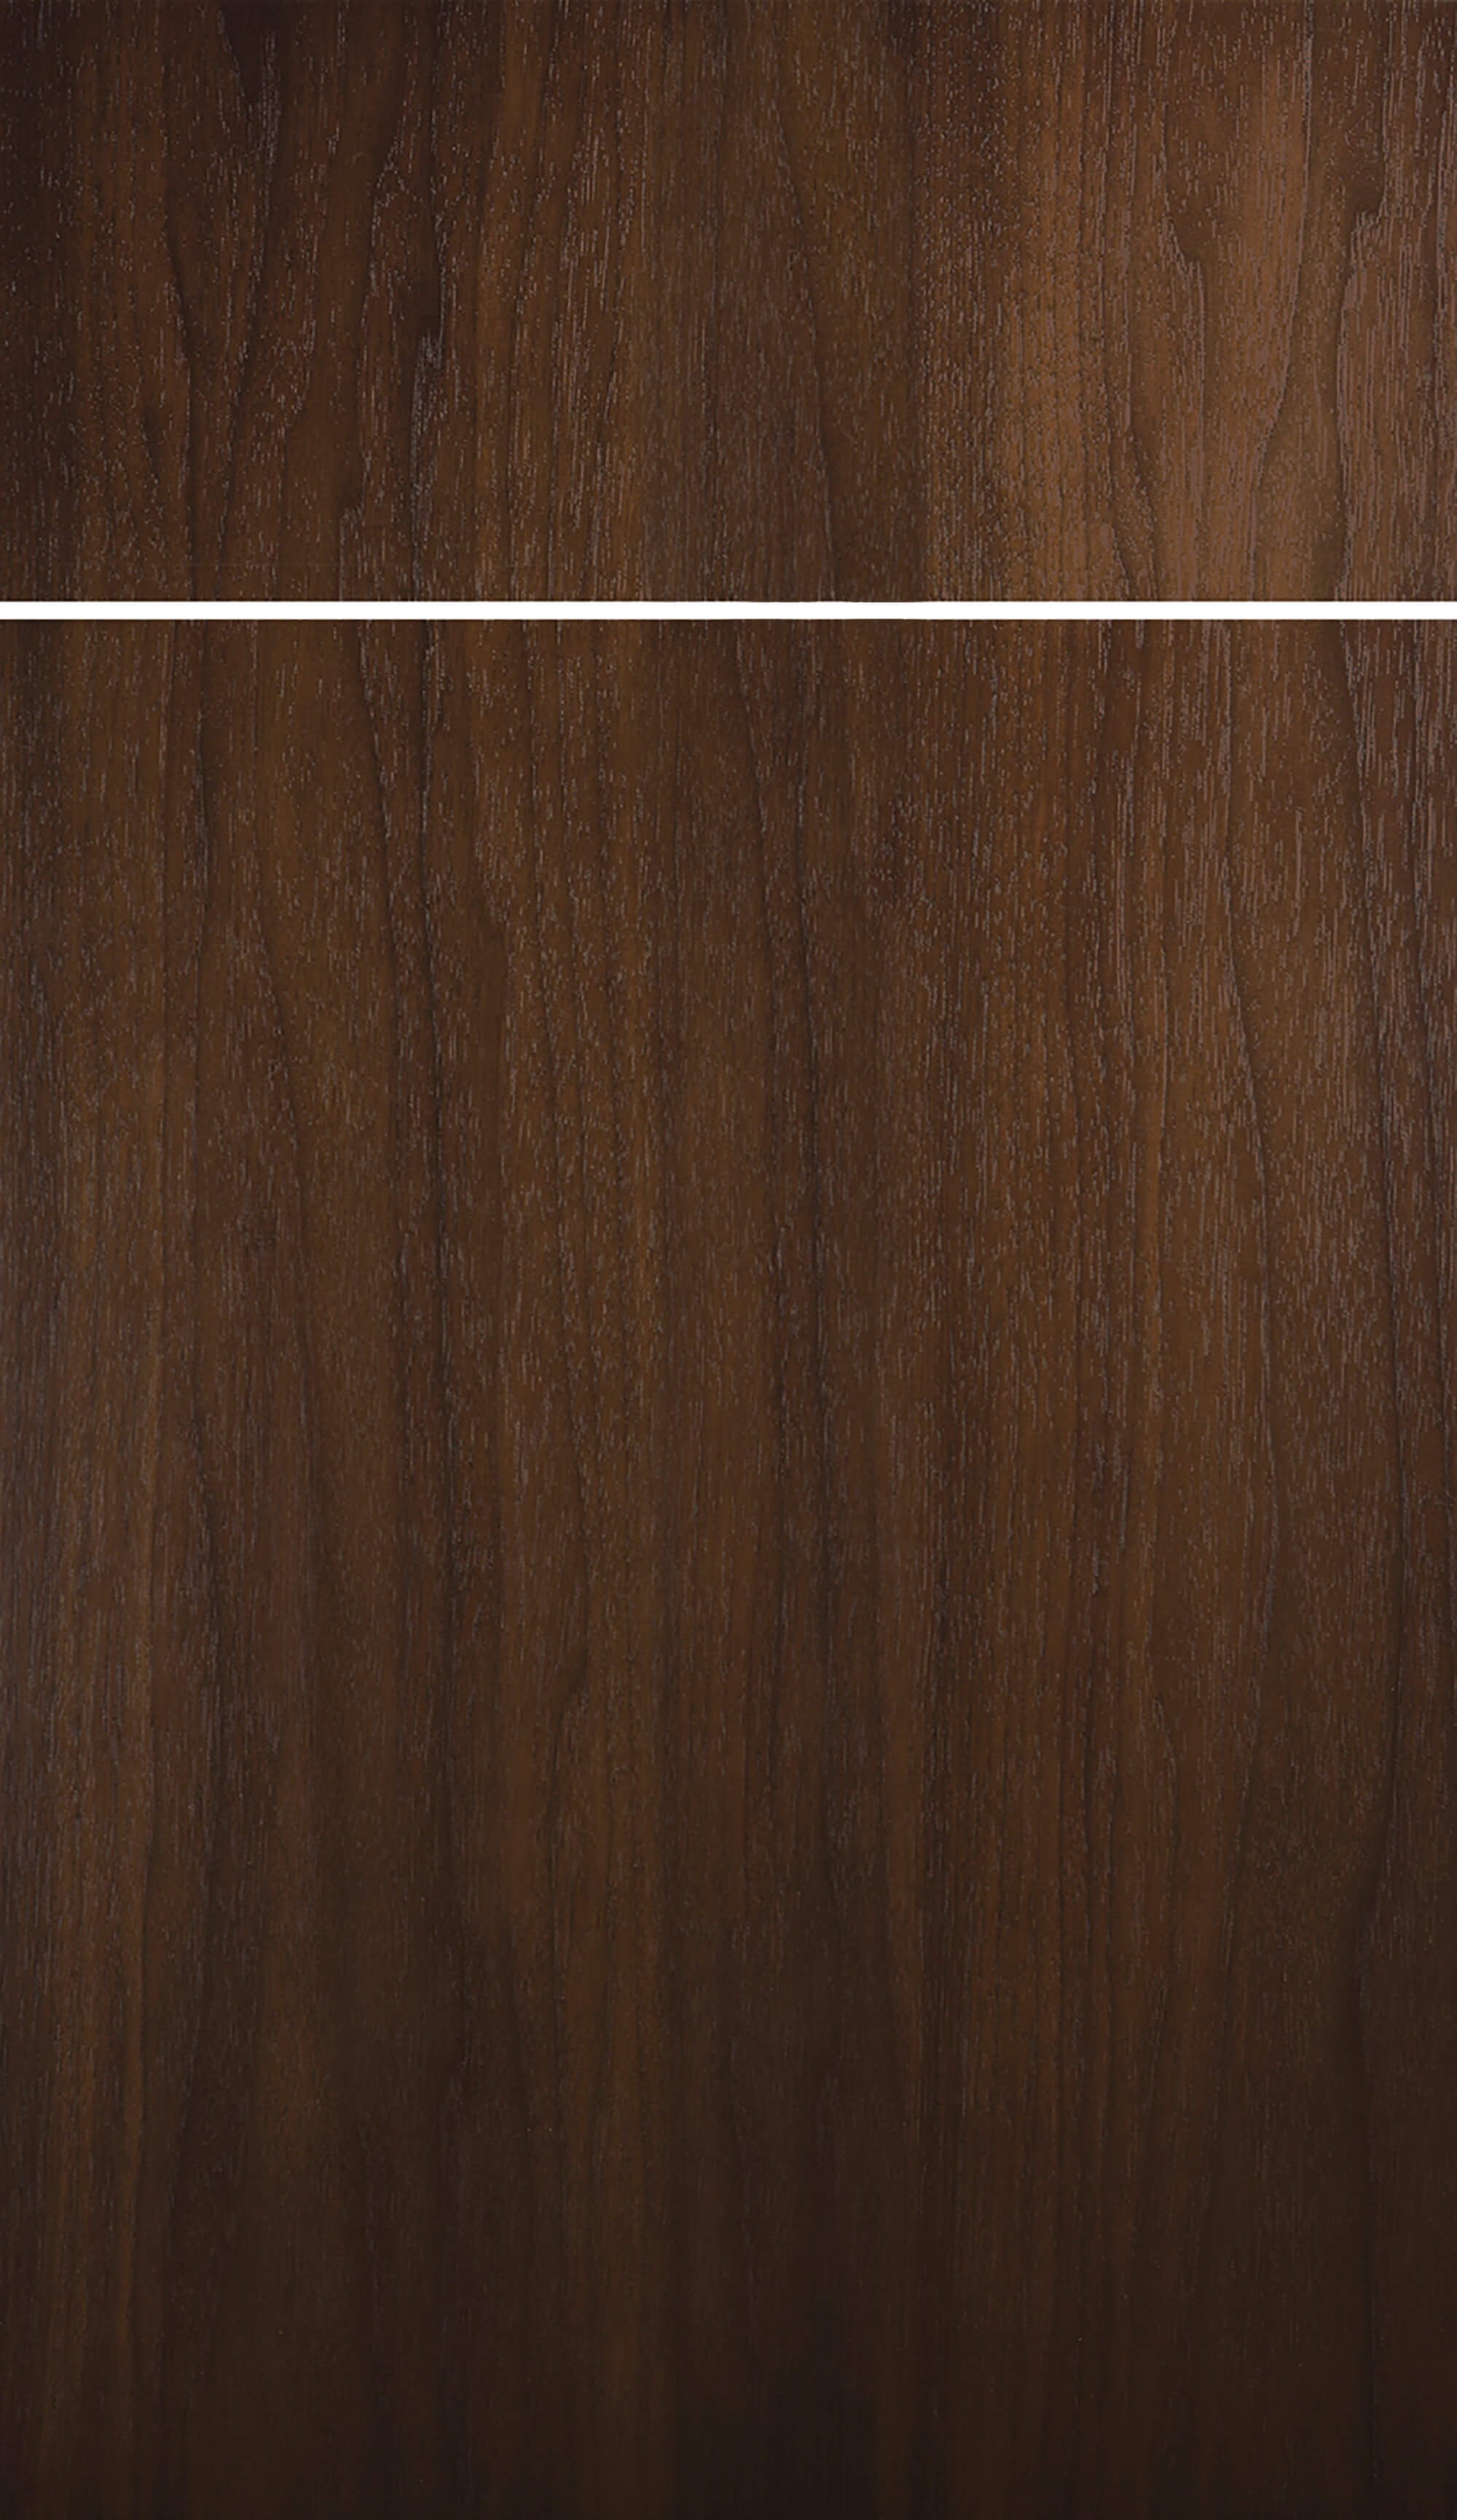 A warm stained walnut on a sleek, modern slab door style from Dura Supreme Cabinetry.